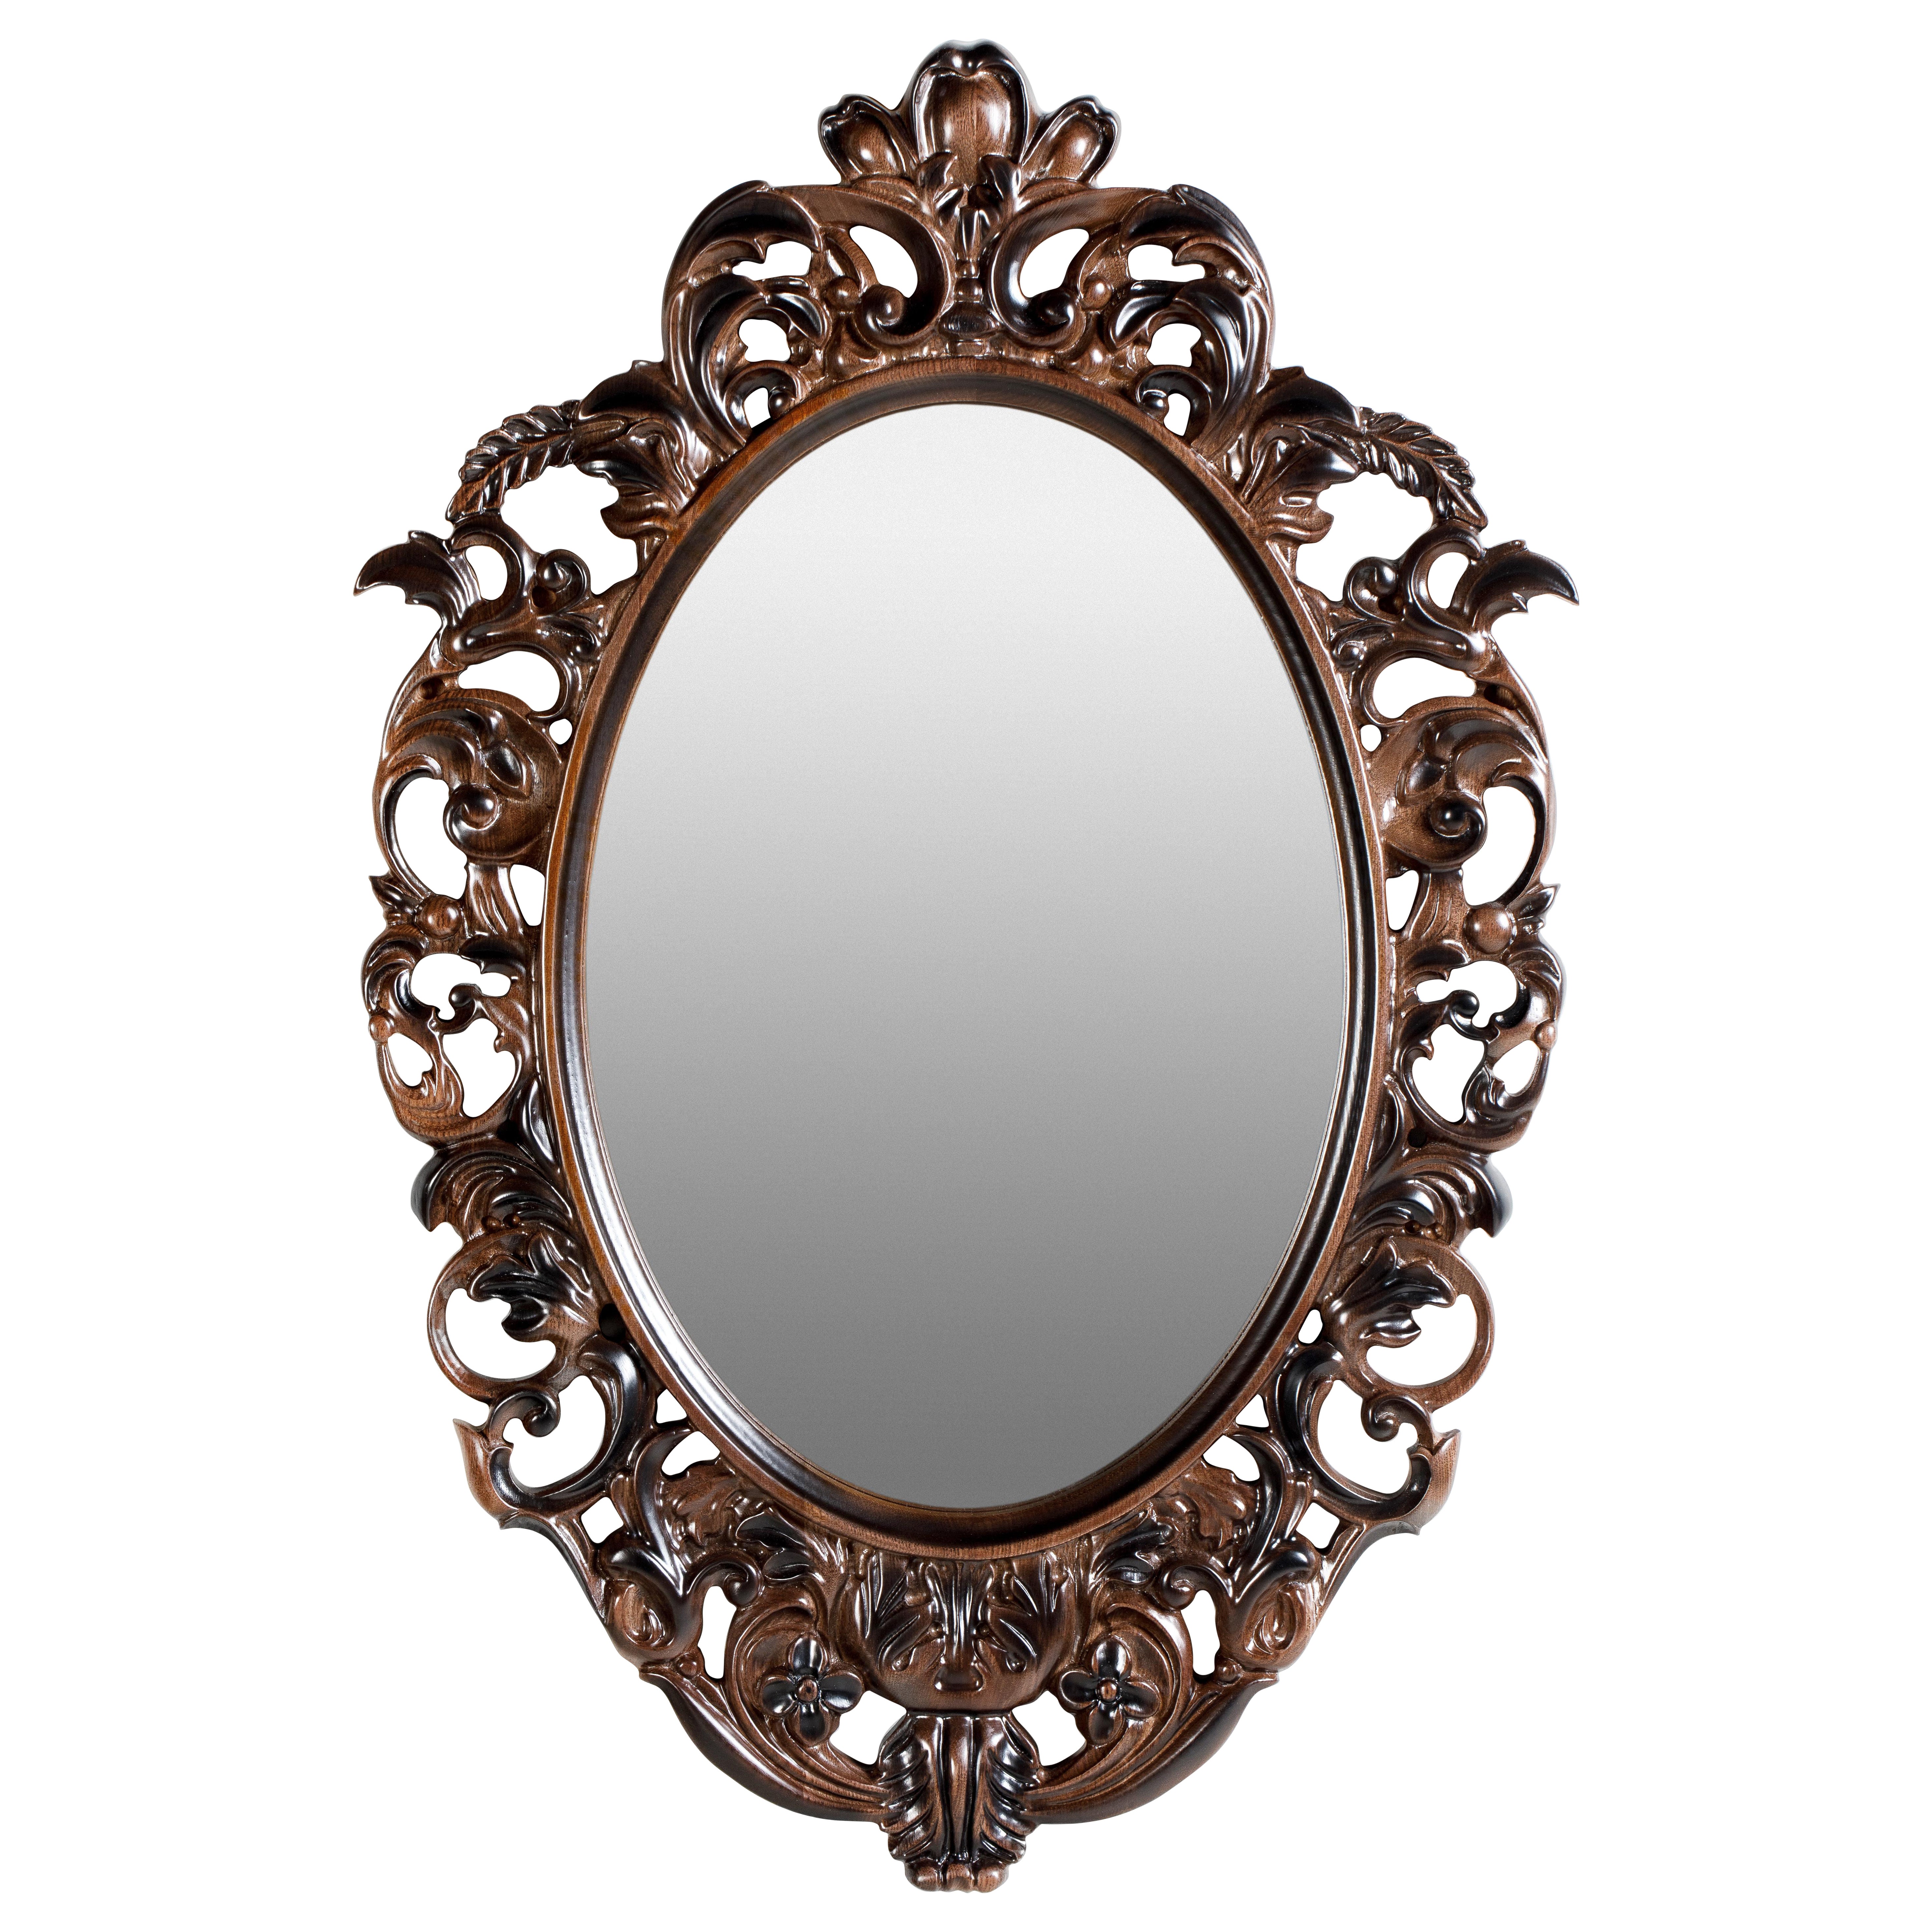 Dark Antique Style Oval Ash Solid Wood Mirror